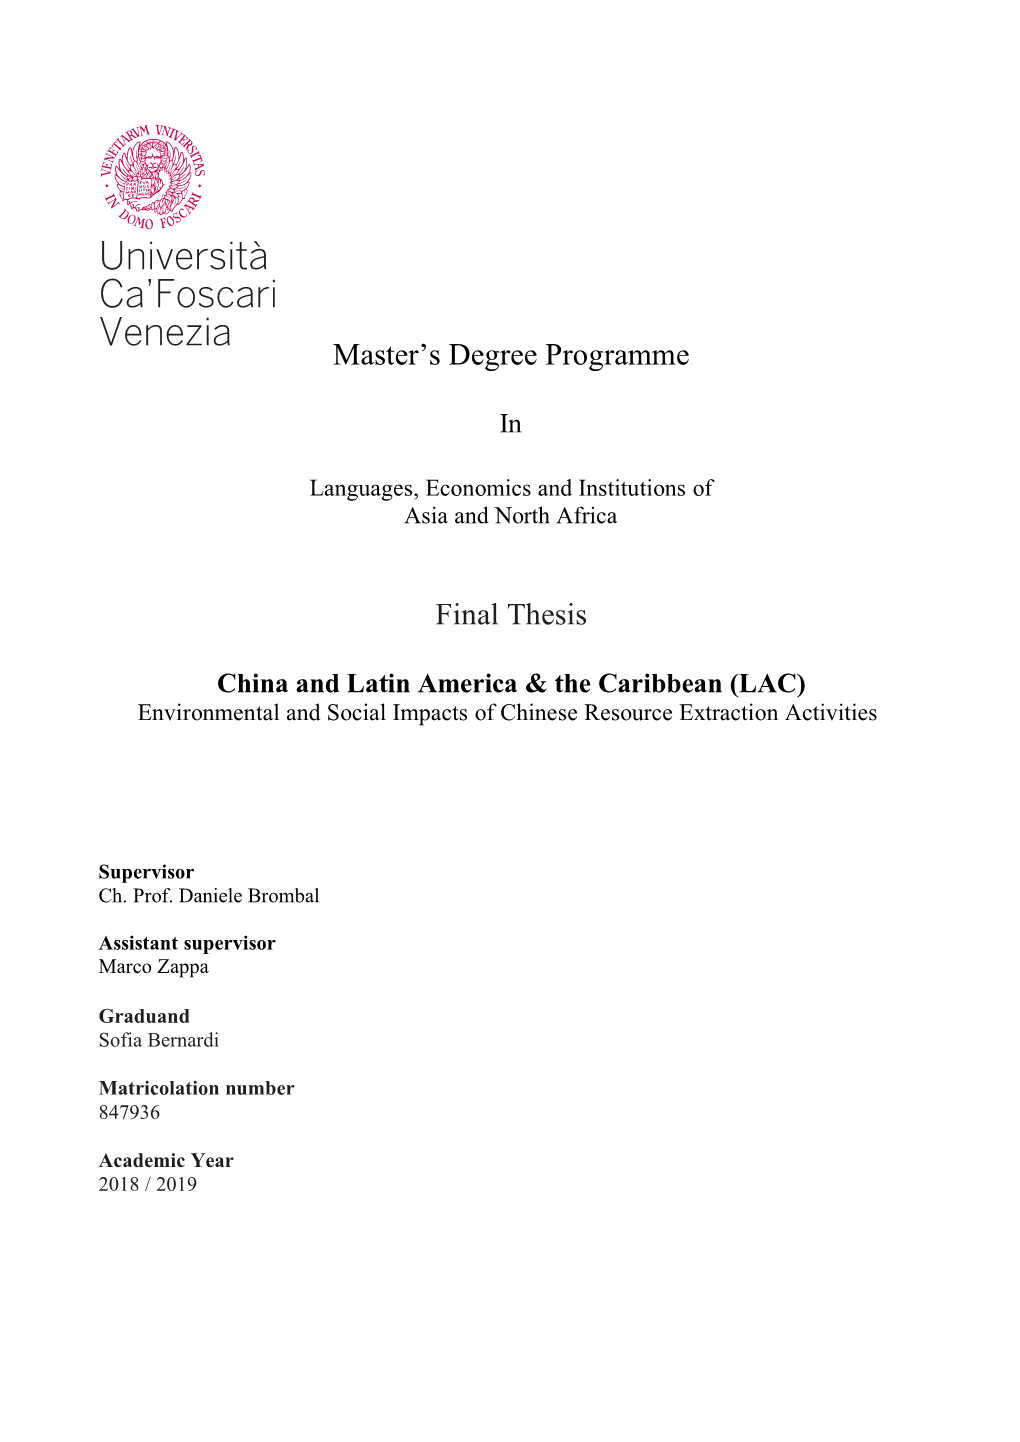 Master's Degree Programme Final Thesis